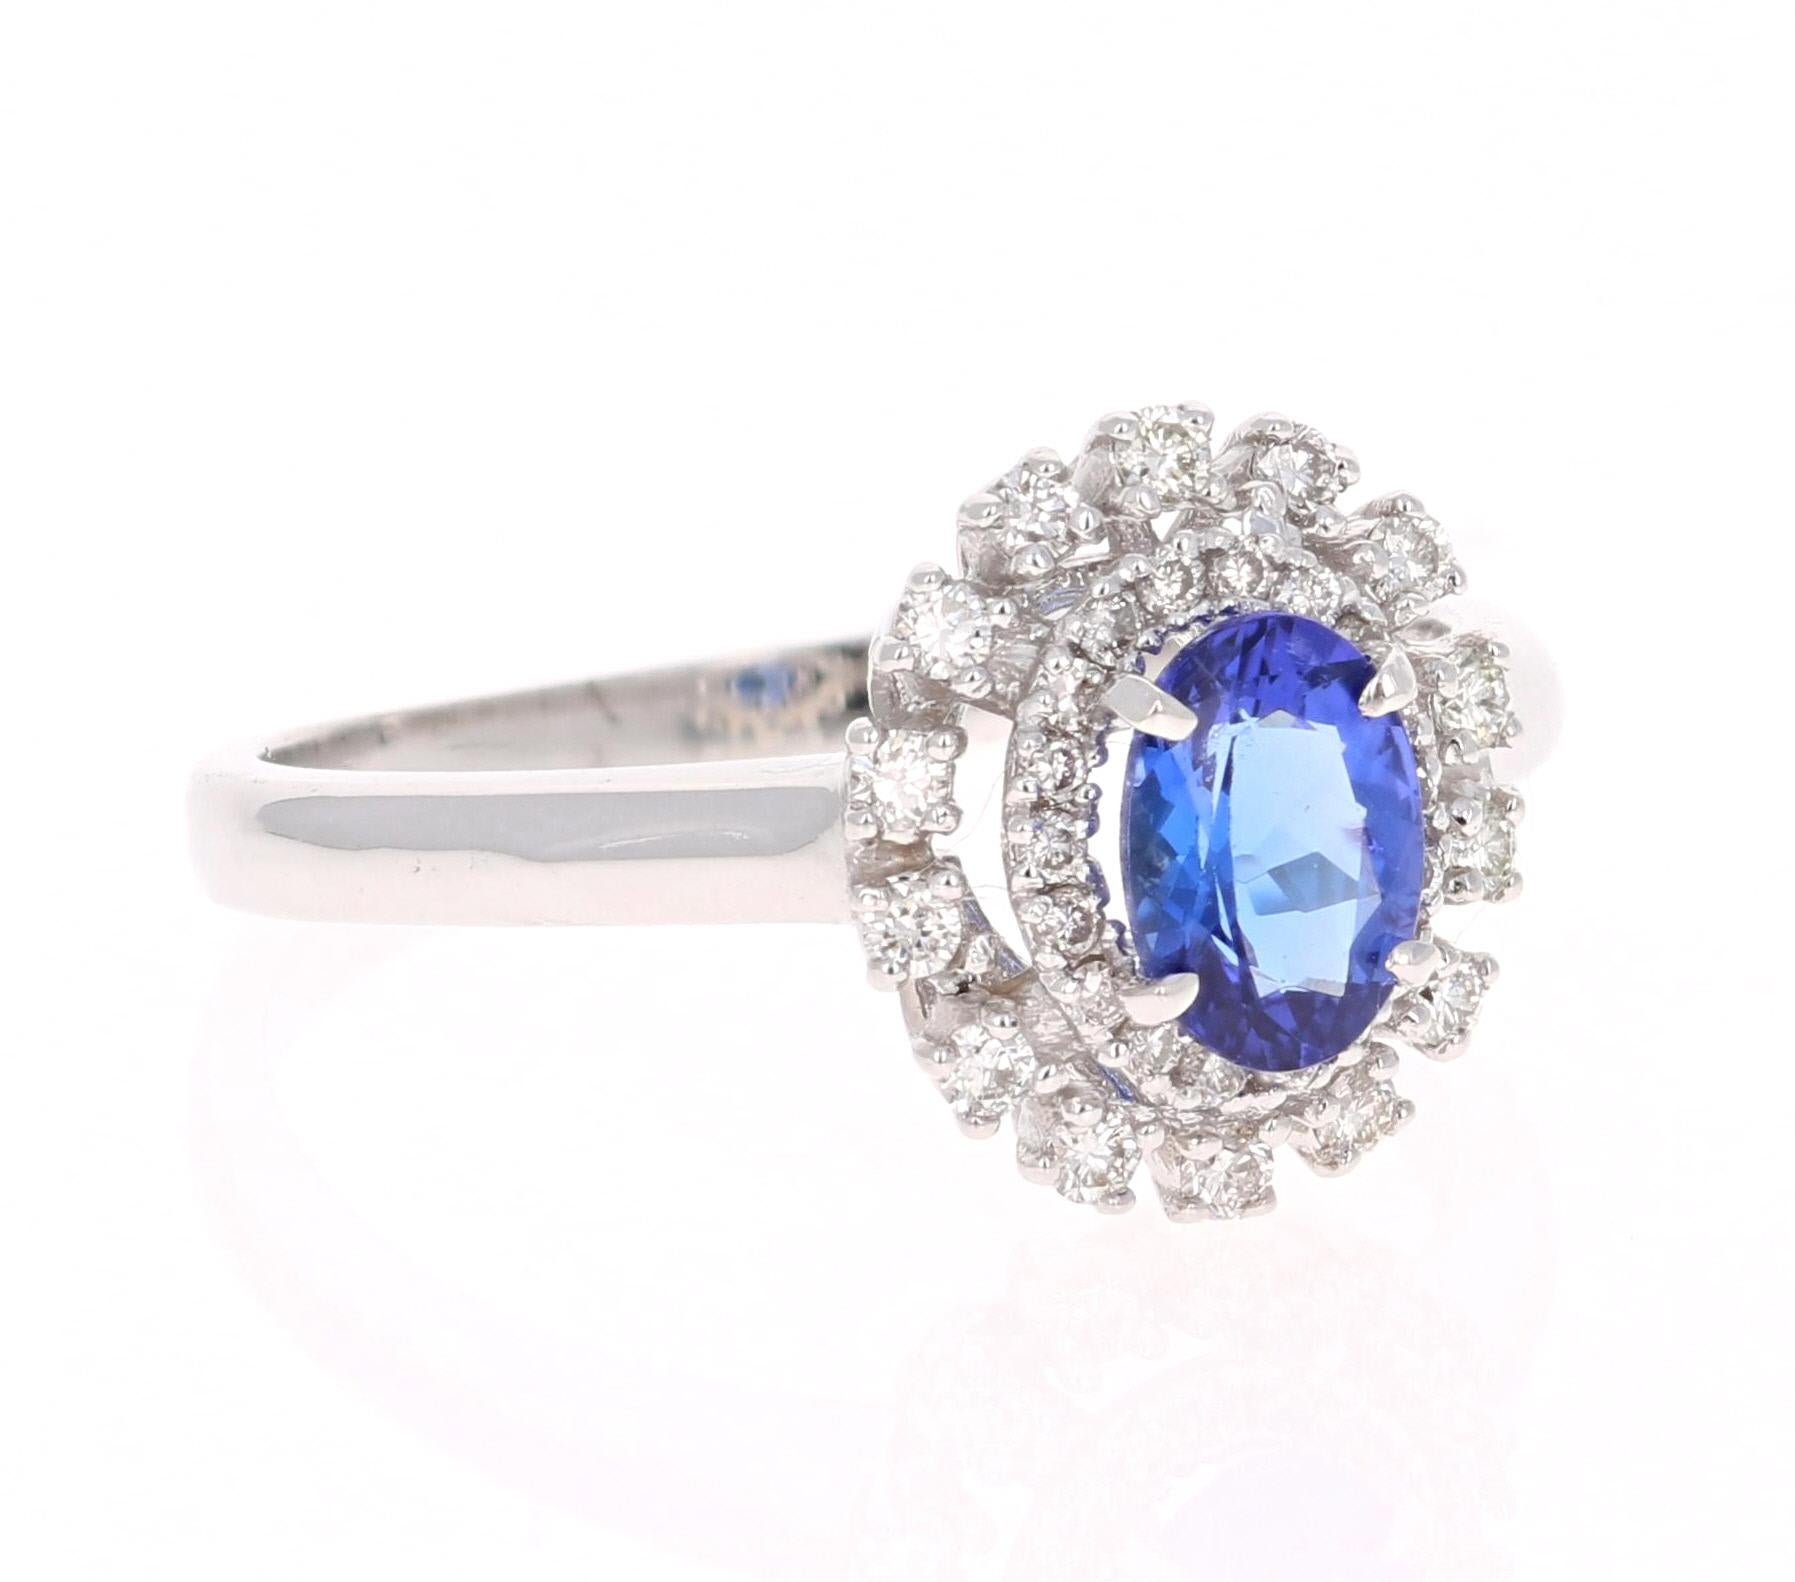 This simple and cute ring has a lovely Oval Cut Tanzanite that weighs 0.65 Carats. It is surrounded by 32 Round Cut Diamonds that weigh 0.28 Carats. The clarity and color of the diamonds are VS-H. 

The ring is in 14 Karat White Gold and weighs